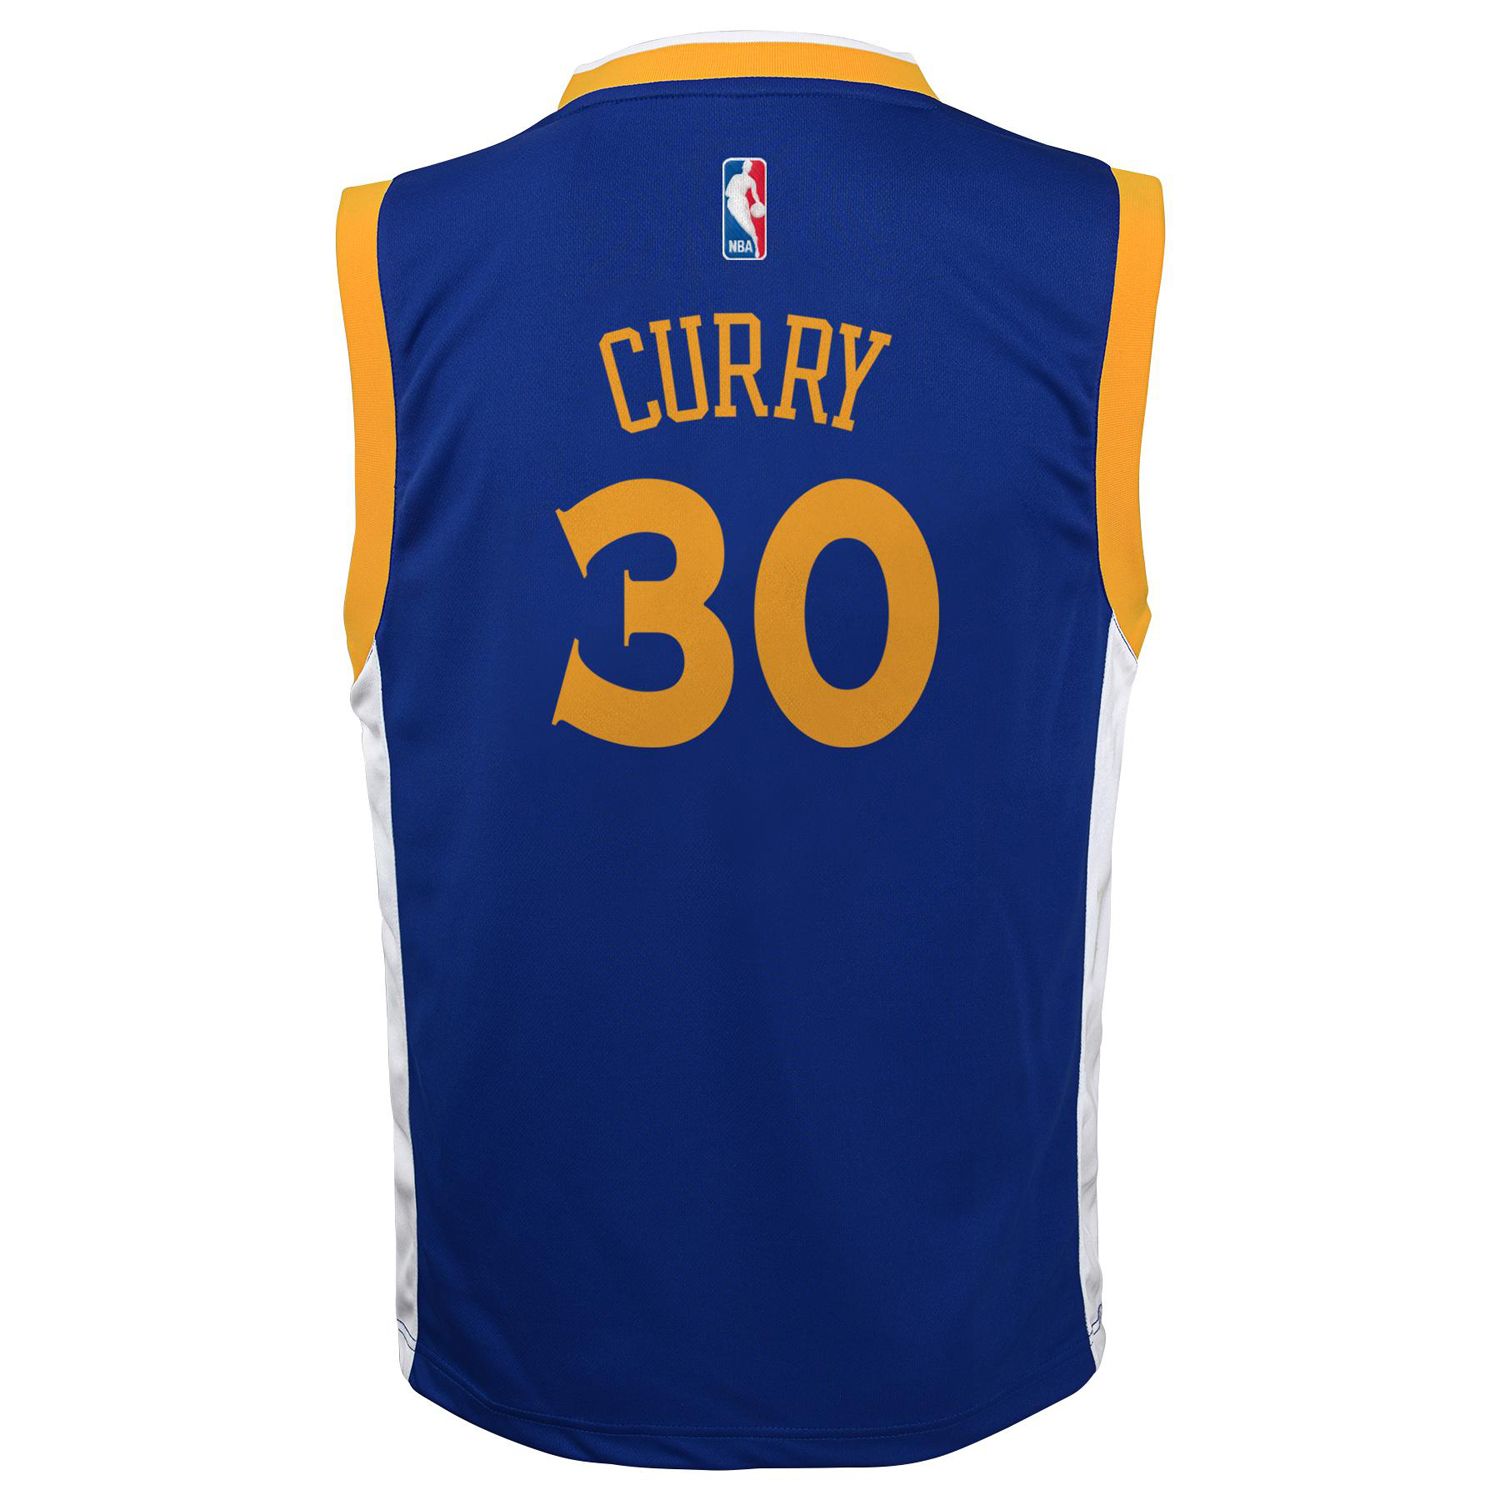 stephen curry jersey near me